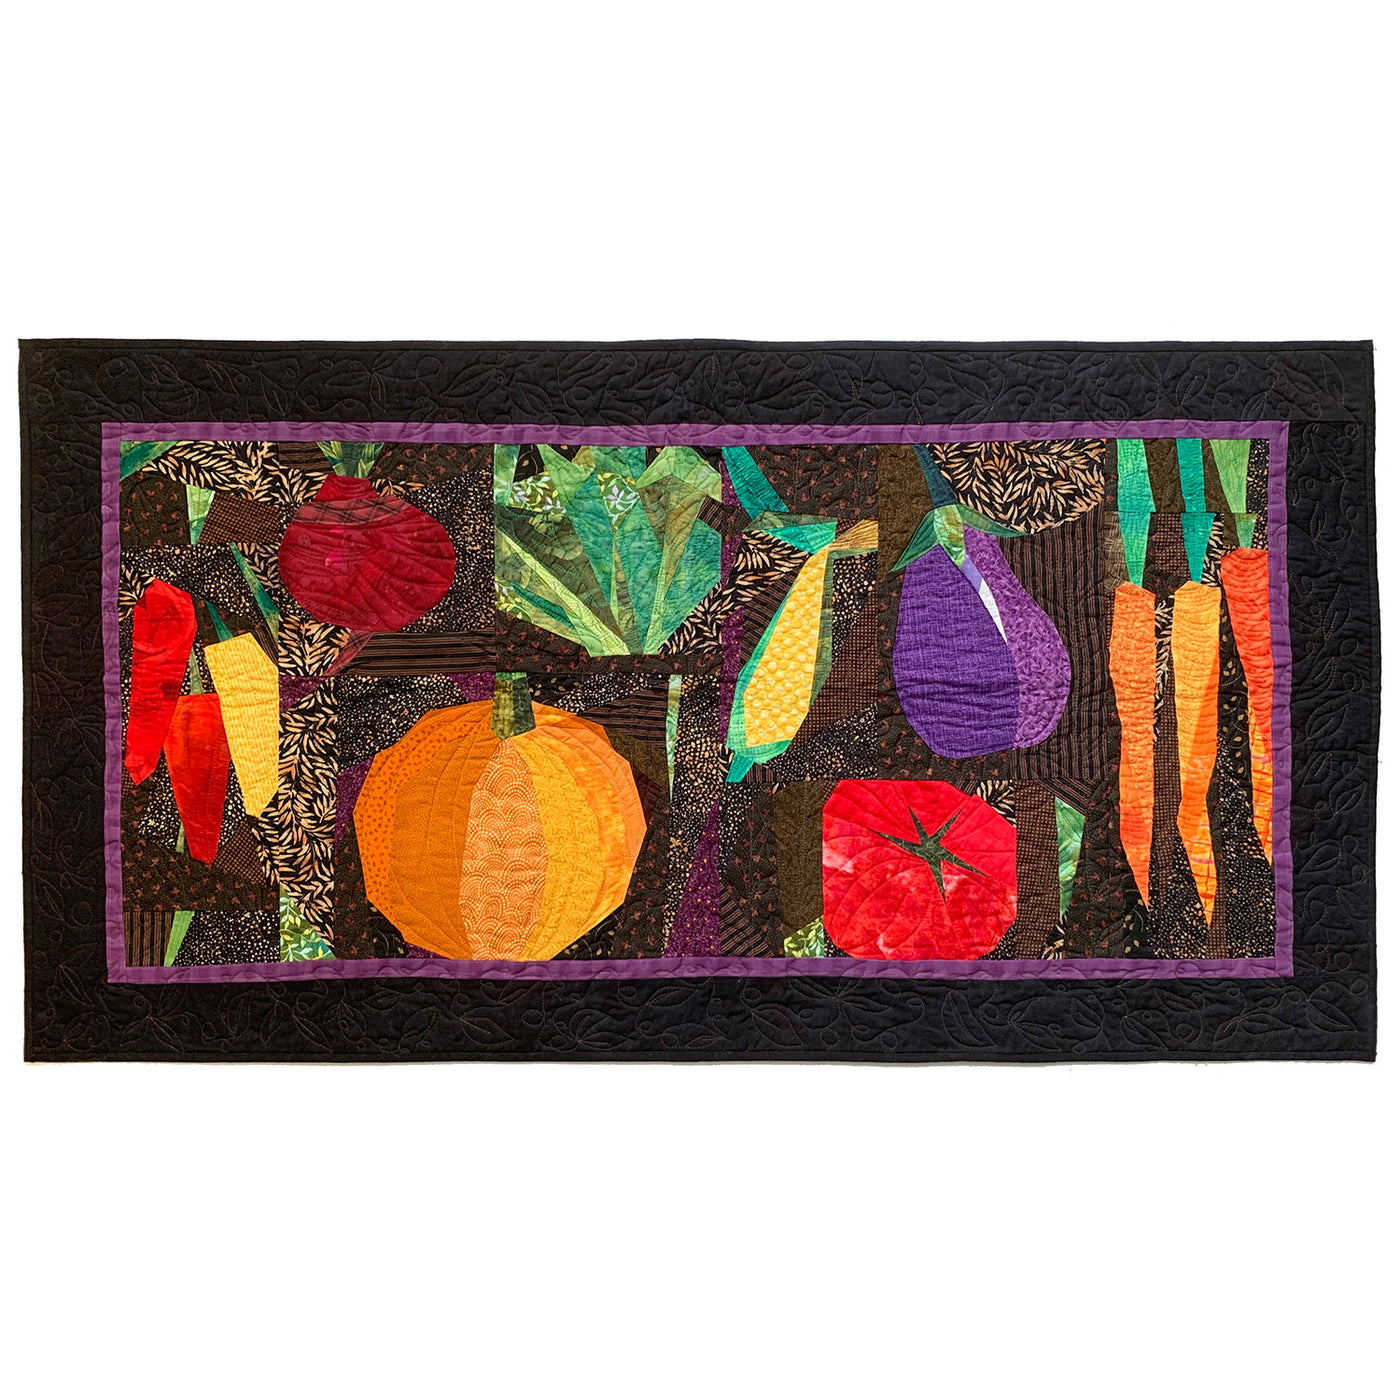 The Harvest Quilt - Jean Wells